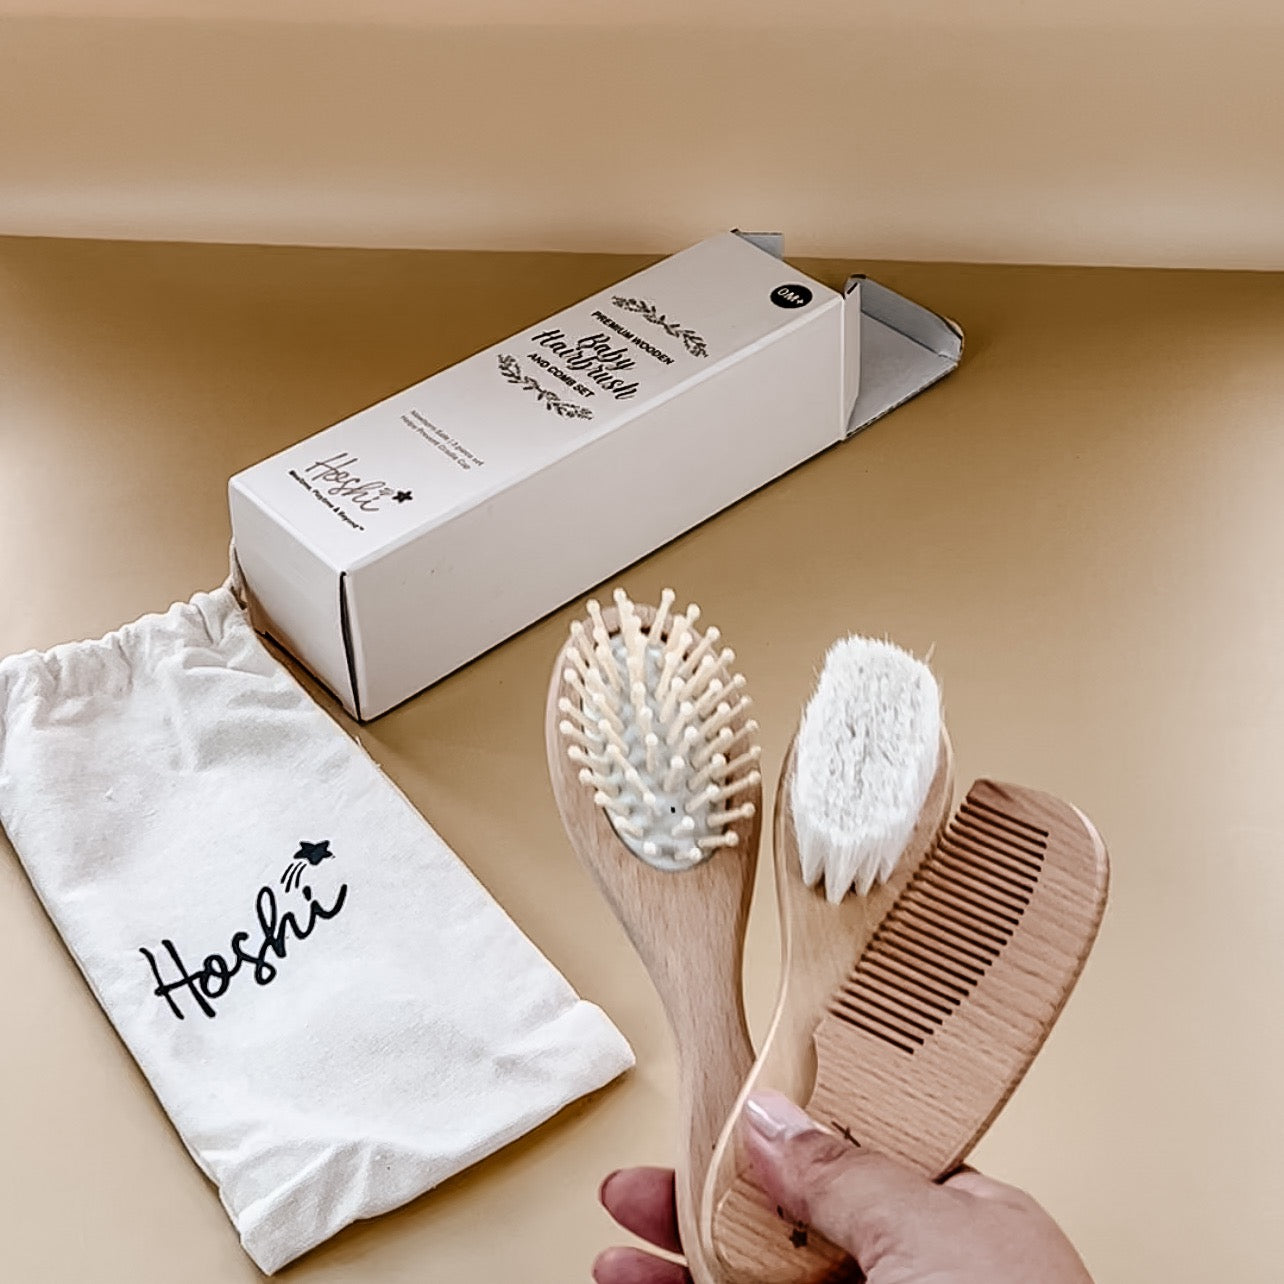 3pc Natural Wooden Hairbrush Comb Set